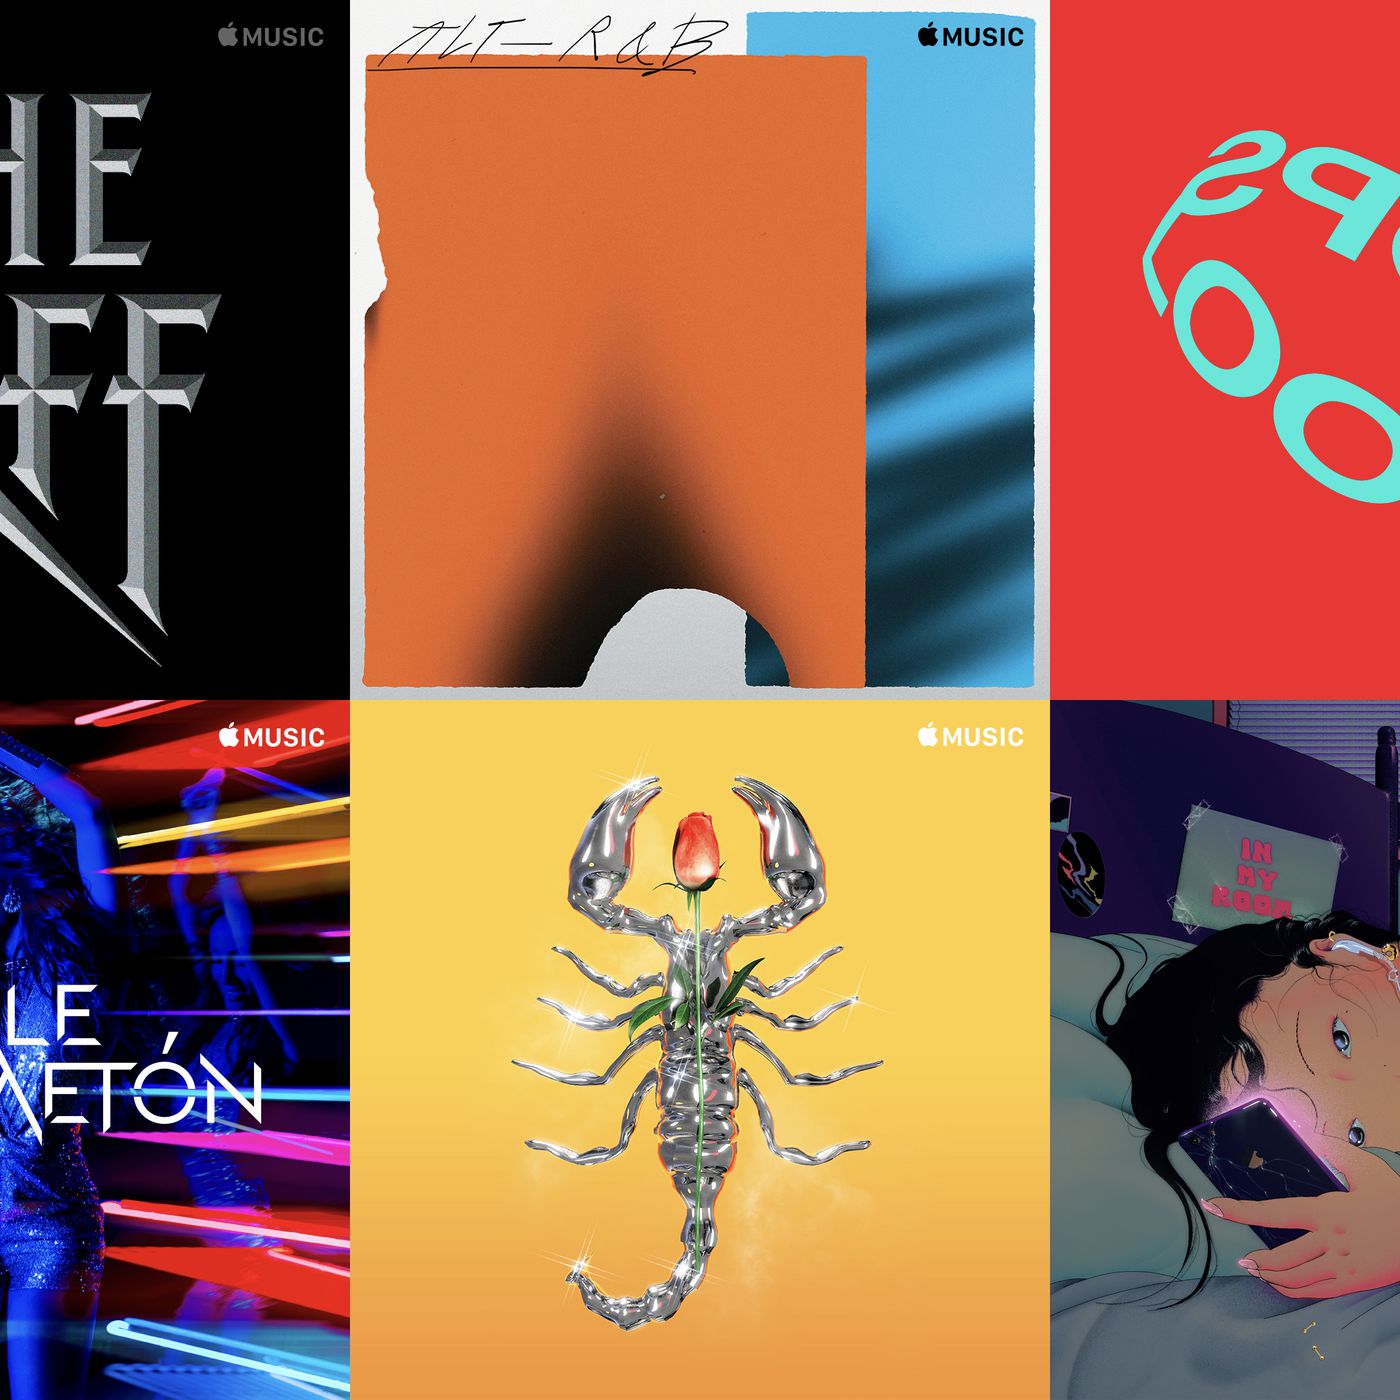 Apple has been quietly hiring iconic artists to design Apple Music playlist covers